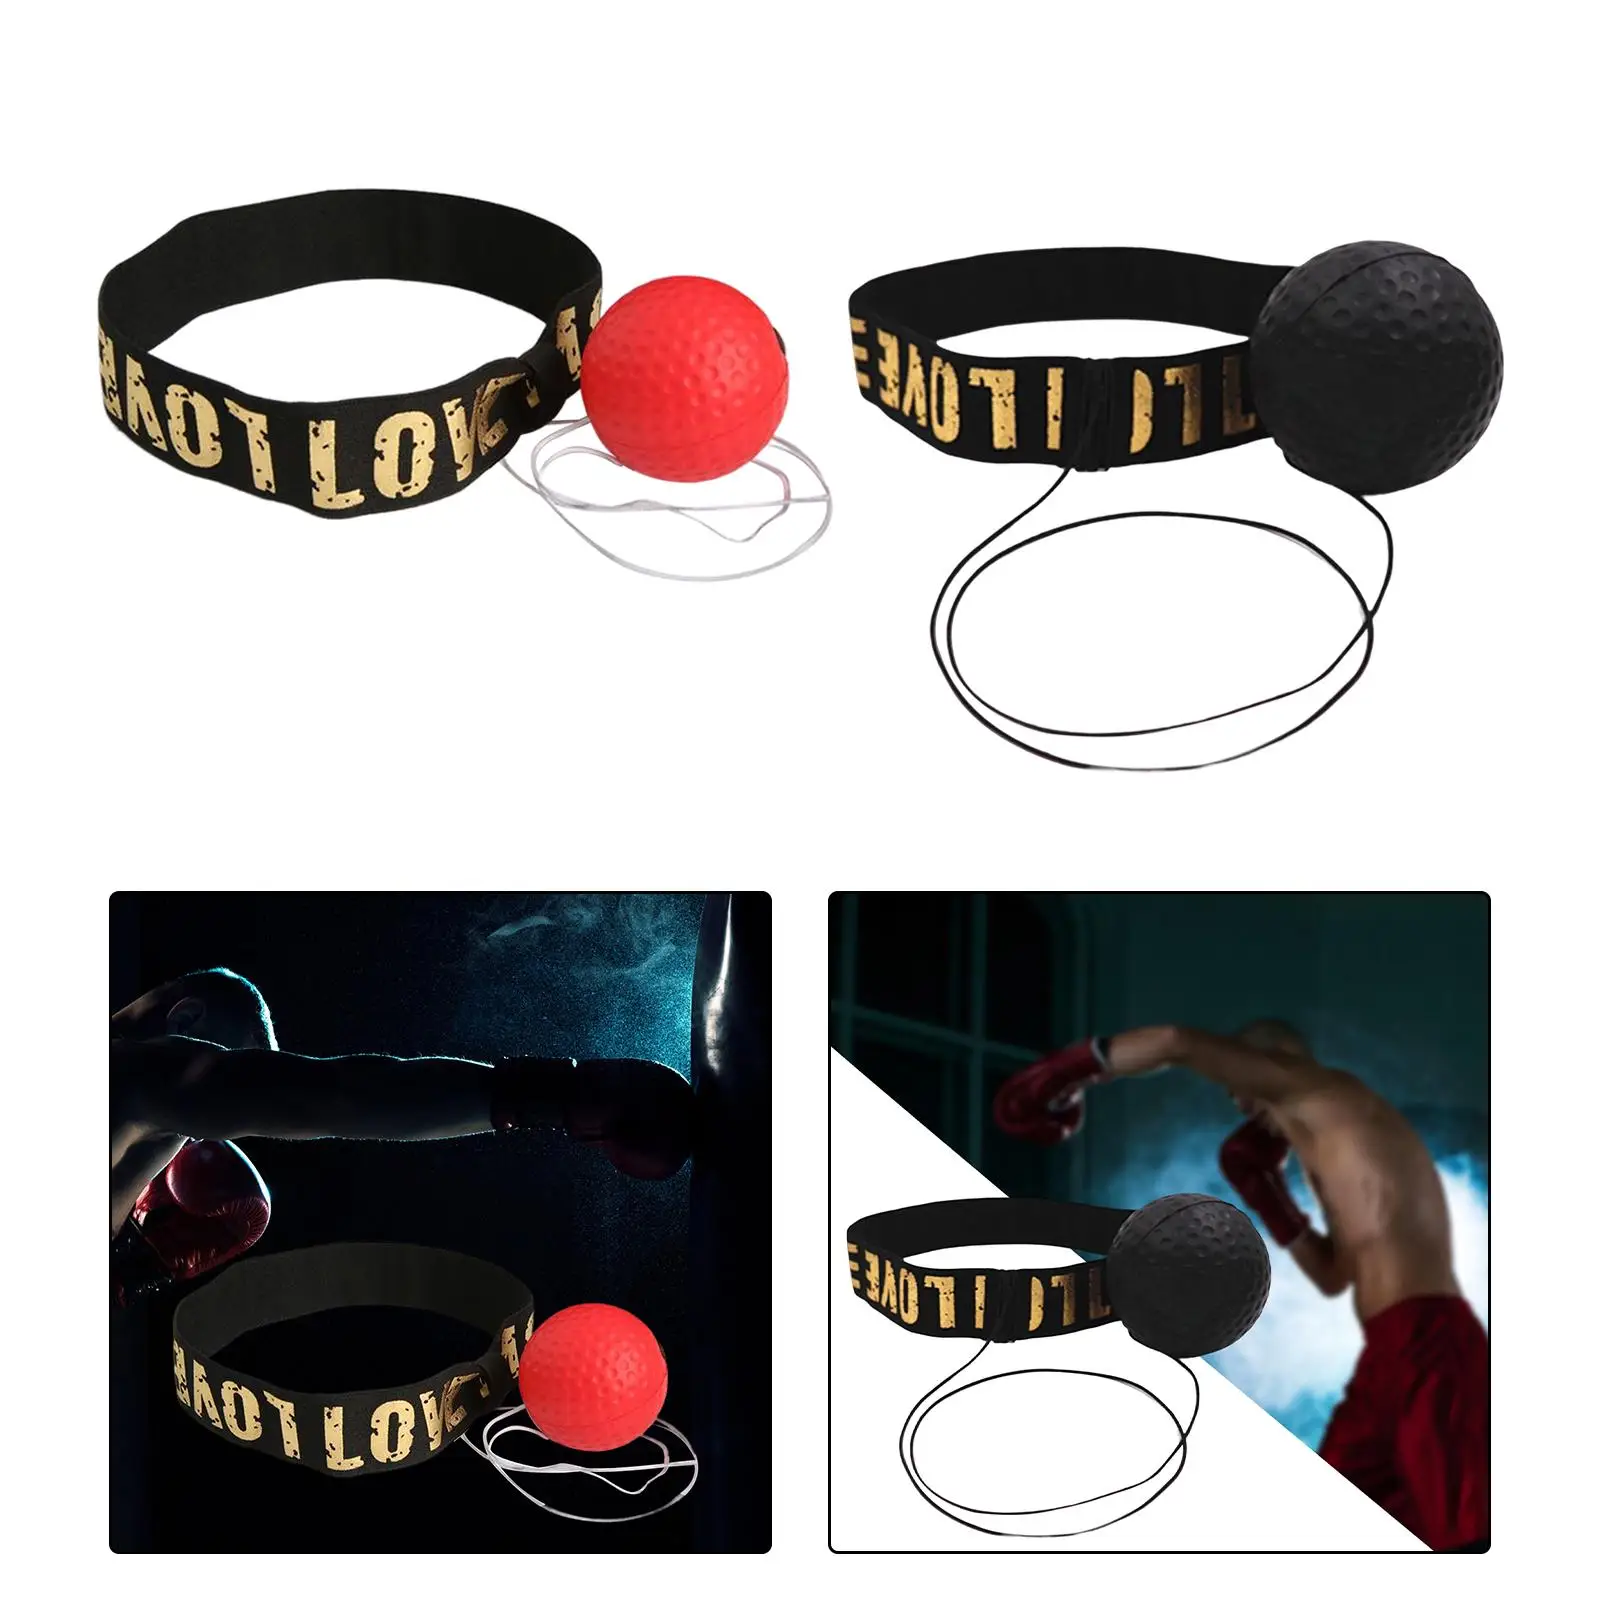 Boxing Reflex Ball Headband Mma Boxing Equipment Punching Bag Exercise Punching Speed Boxing Ball on strings for Fitness Agility